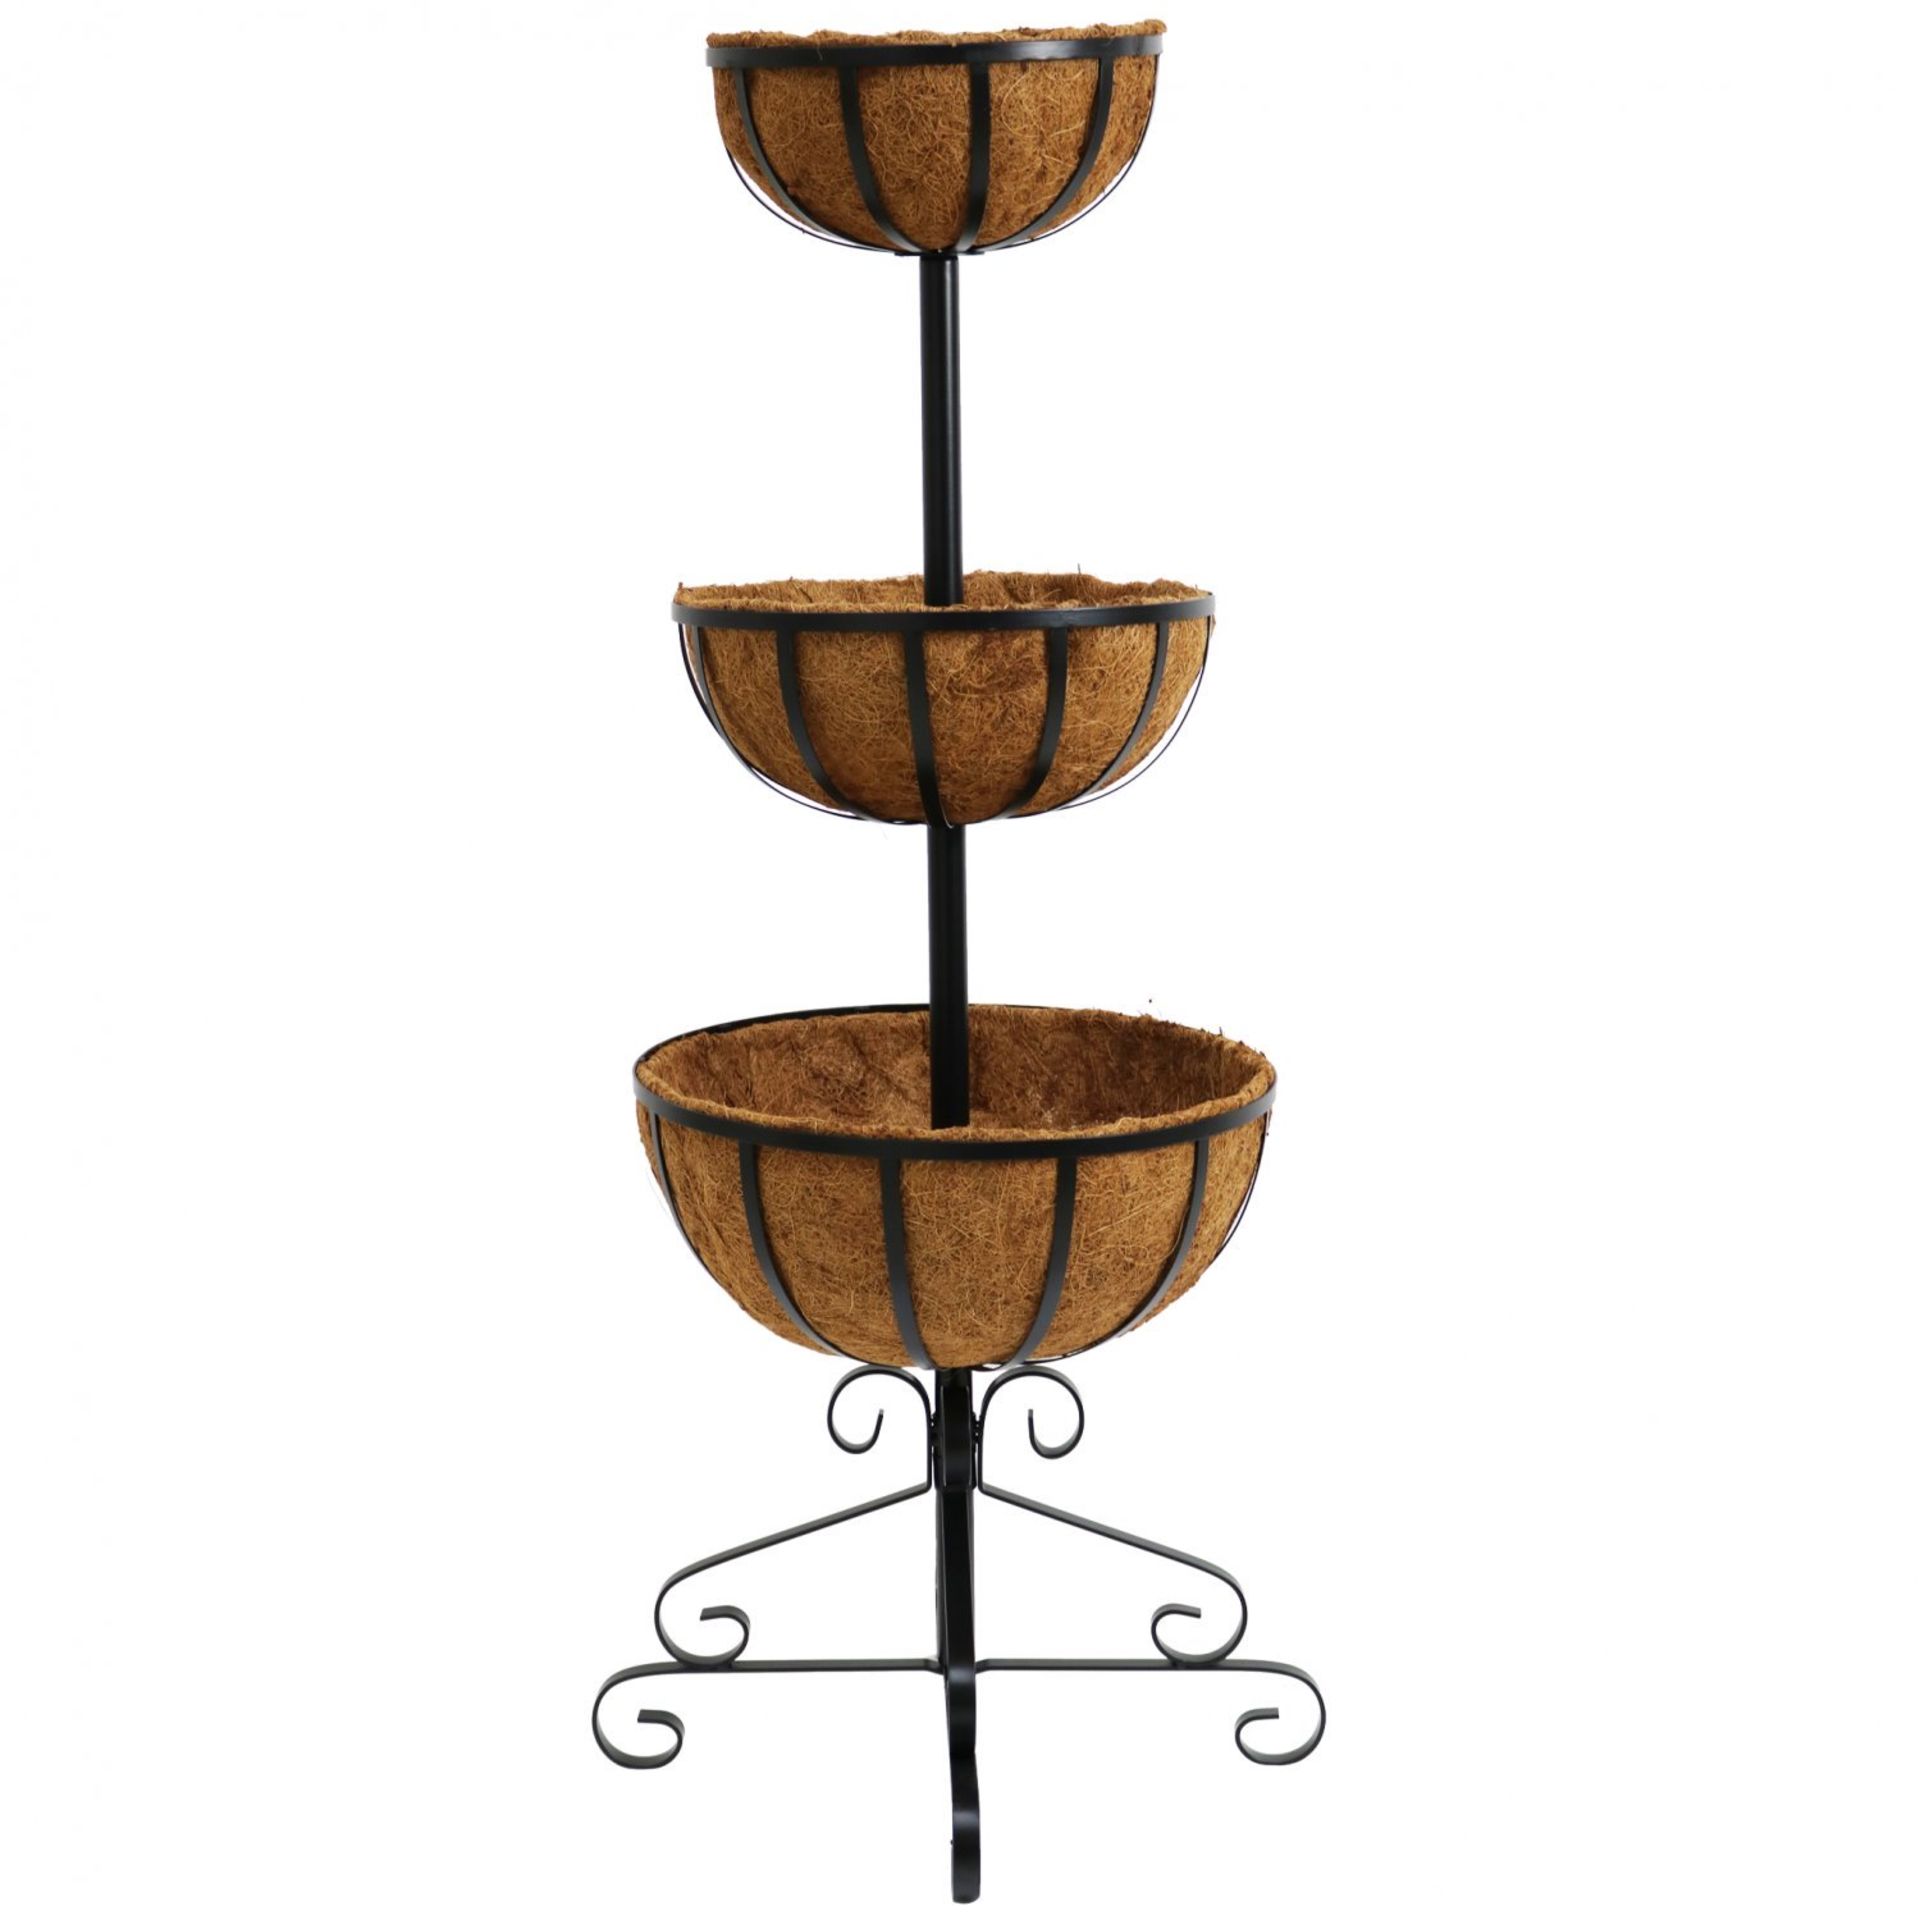 (LF186) 3 Tier Metal Garden Flower Fountain Plant Display Stand with Coco Liners Our flowe... - Bild 2 aus 2